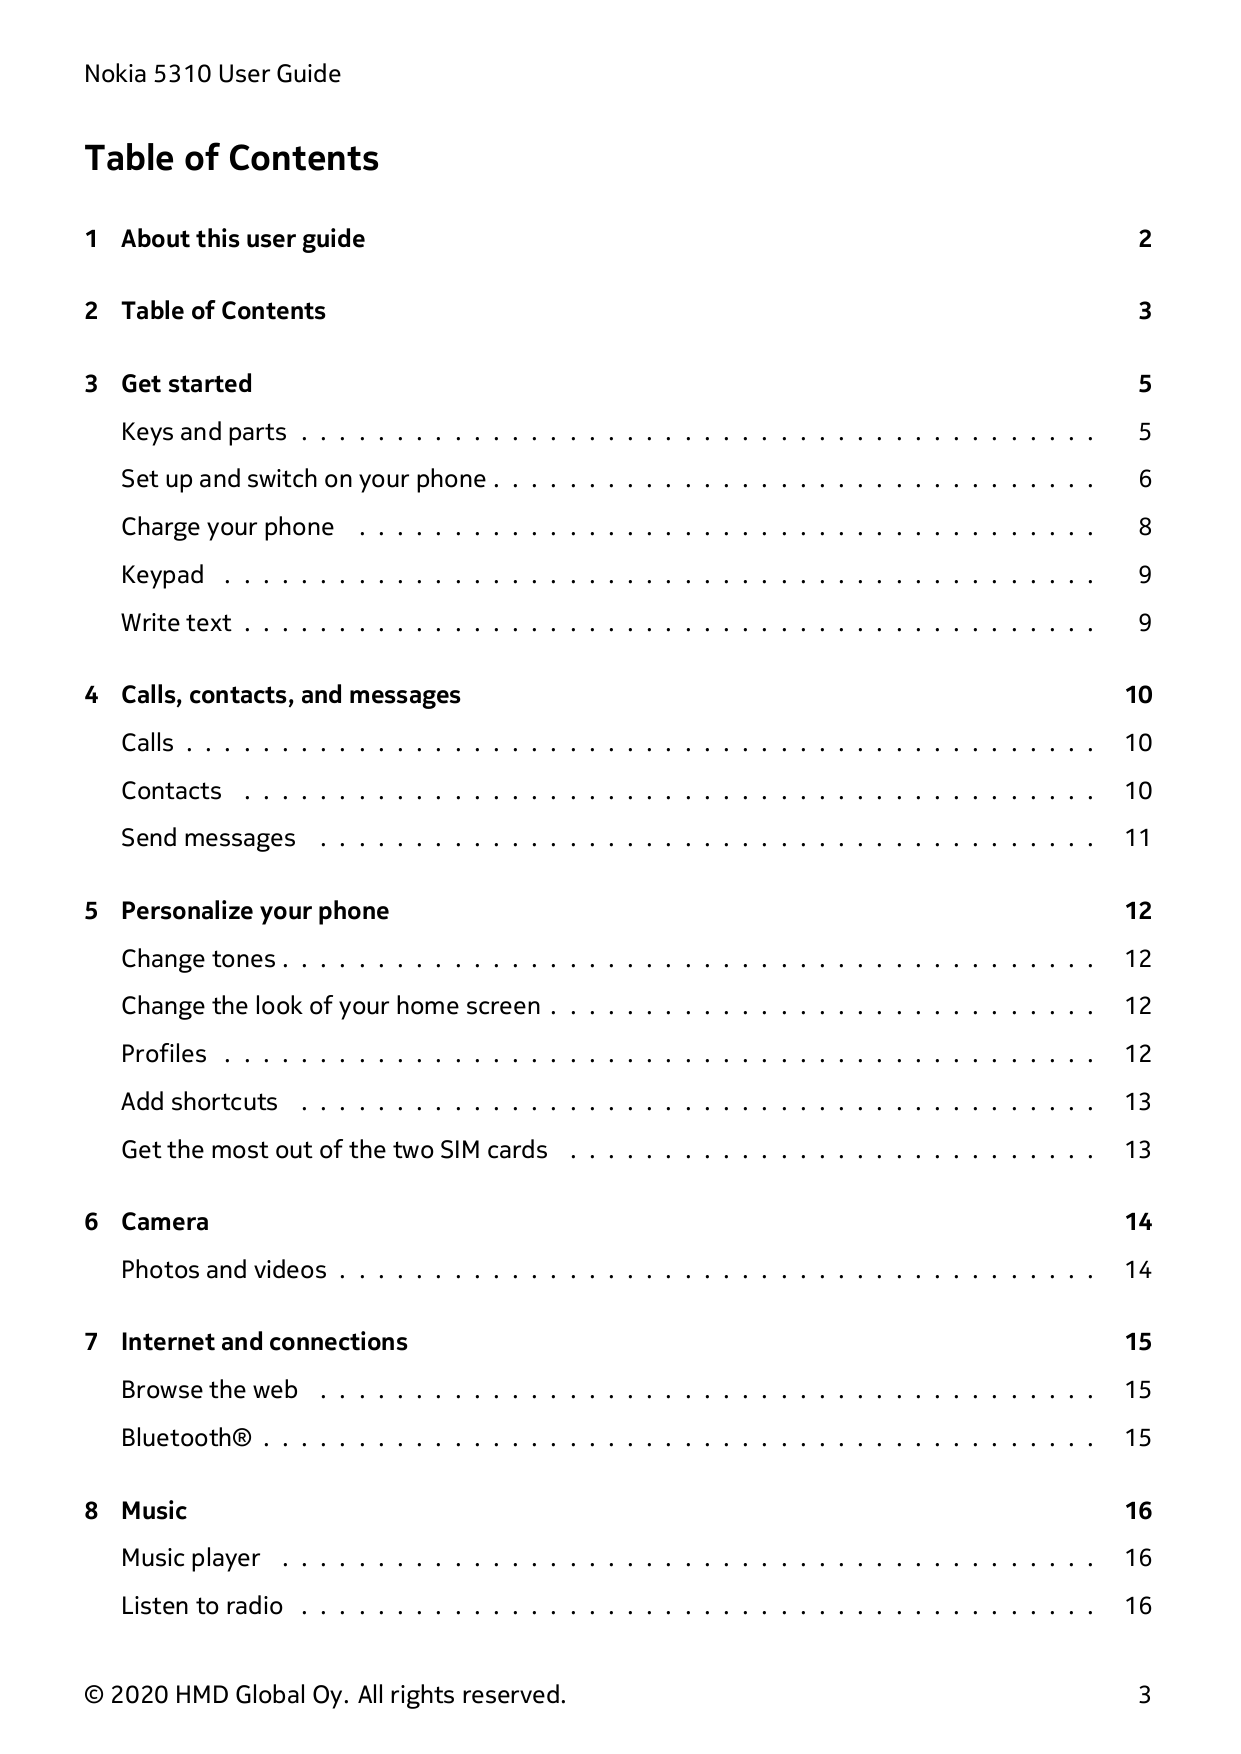 Nokia 5310 User GuideTable of Contents1 About this user guide22 Table of Contents33 Get started5Keys and parts . . . . . . . . .